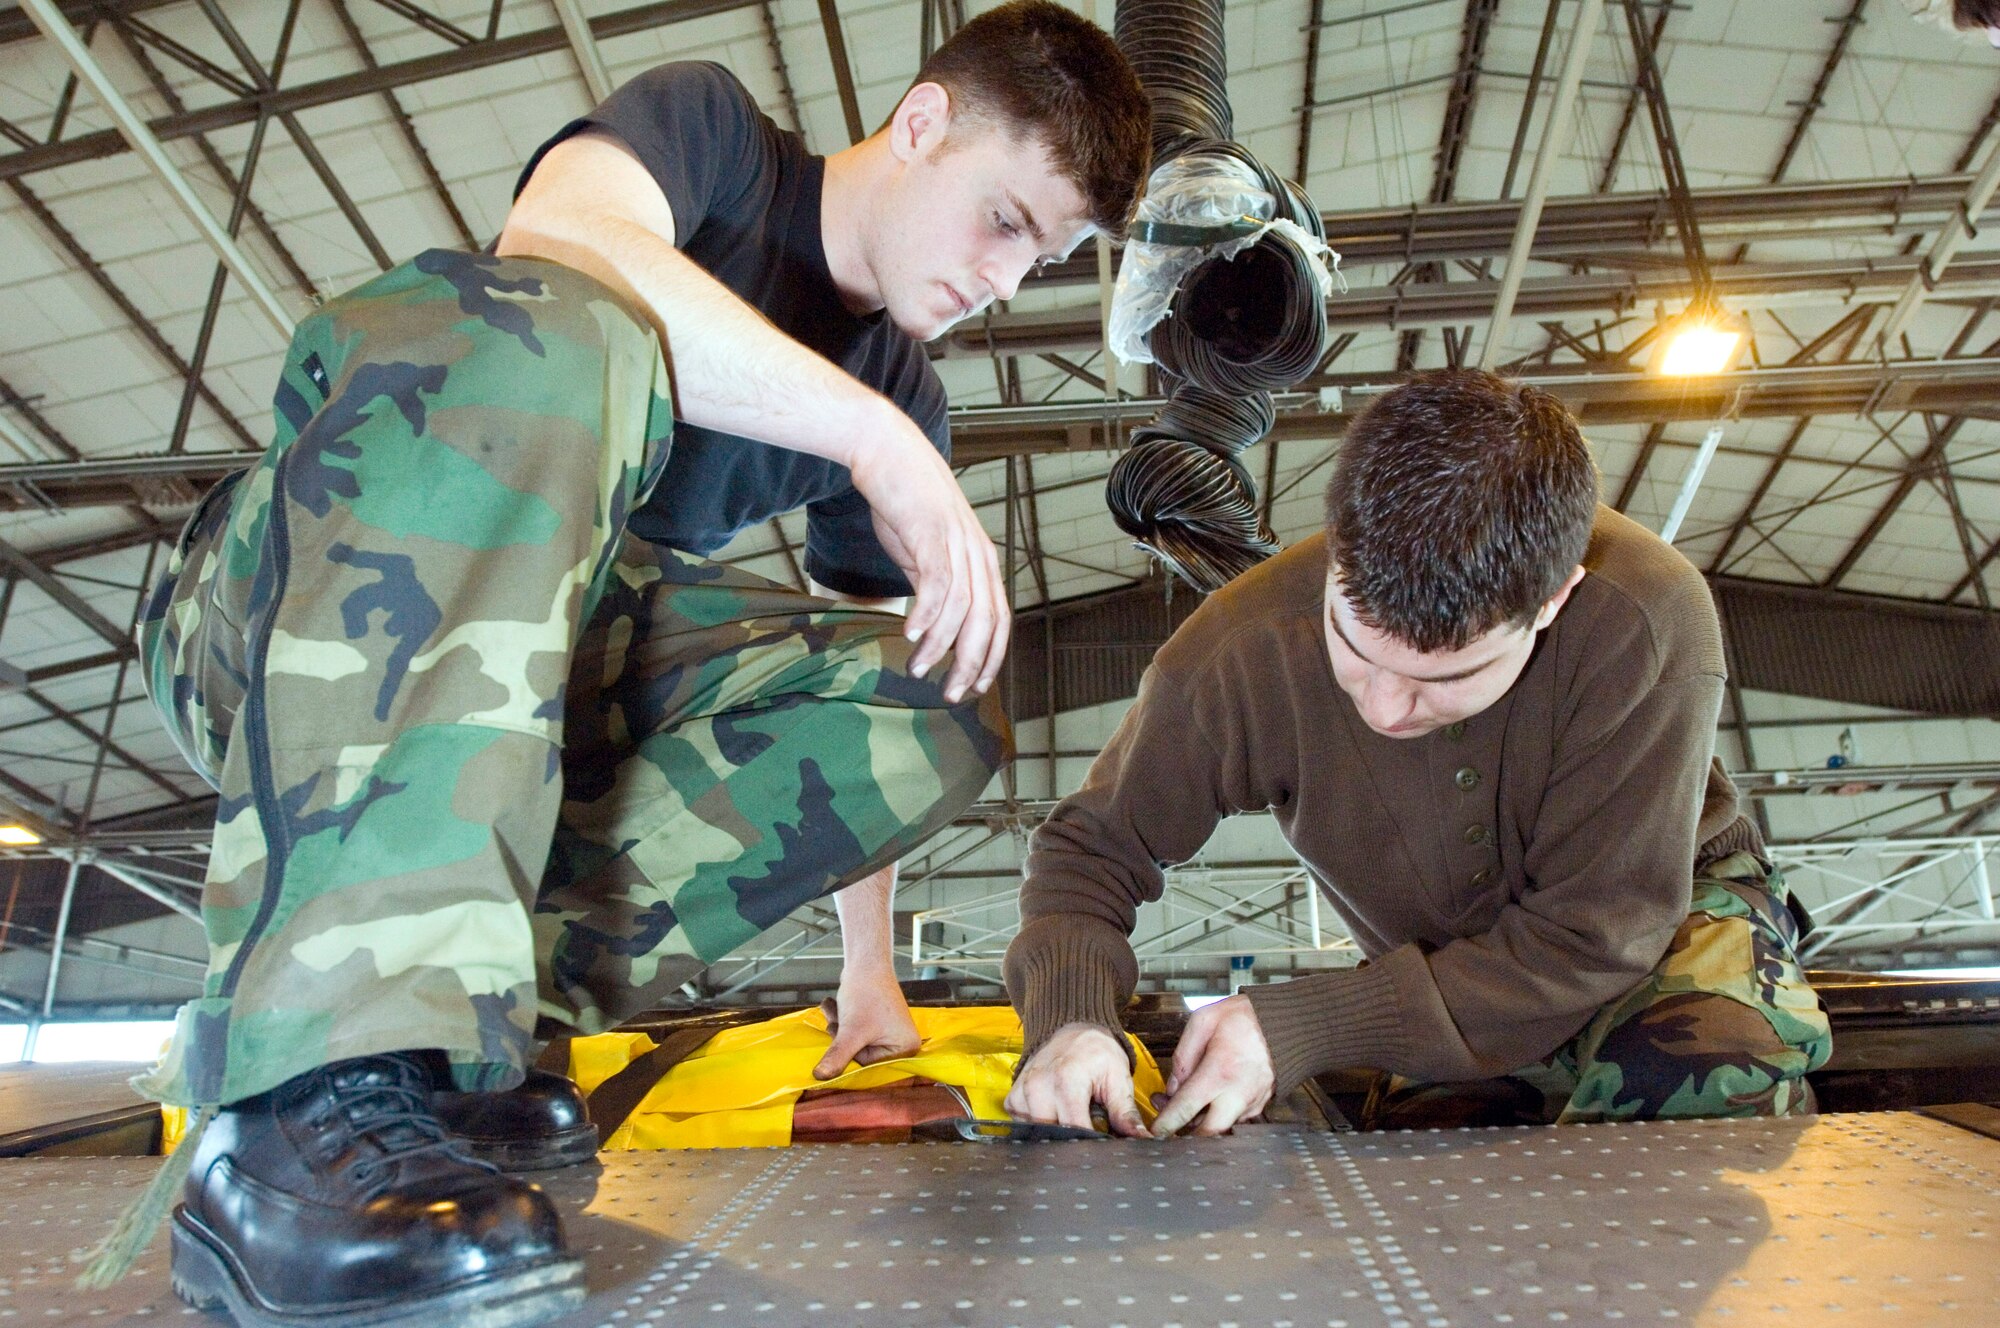 Airman 1st Class Beau Strausbaugh and Senior Airman Andrew Tishim, left to right, install a life raft into a C-130 Hercules at Ramstein Air Base, Germany, on Monday, March 27, 2006. The Airmen are Hercules crew chiefs with the 86th Aircraft Maintenance Squadron. (U.S. Air Force photo/Master Sgt. John E. Lasky)
